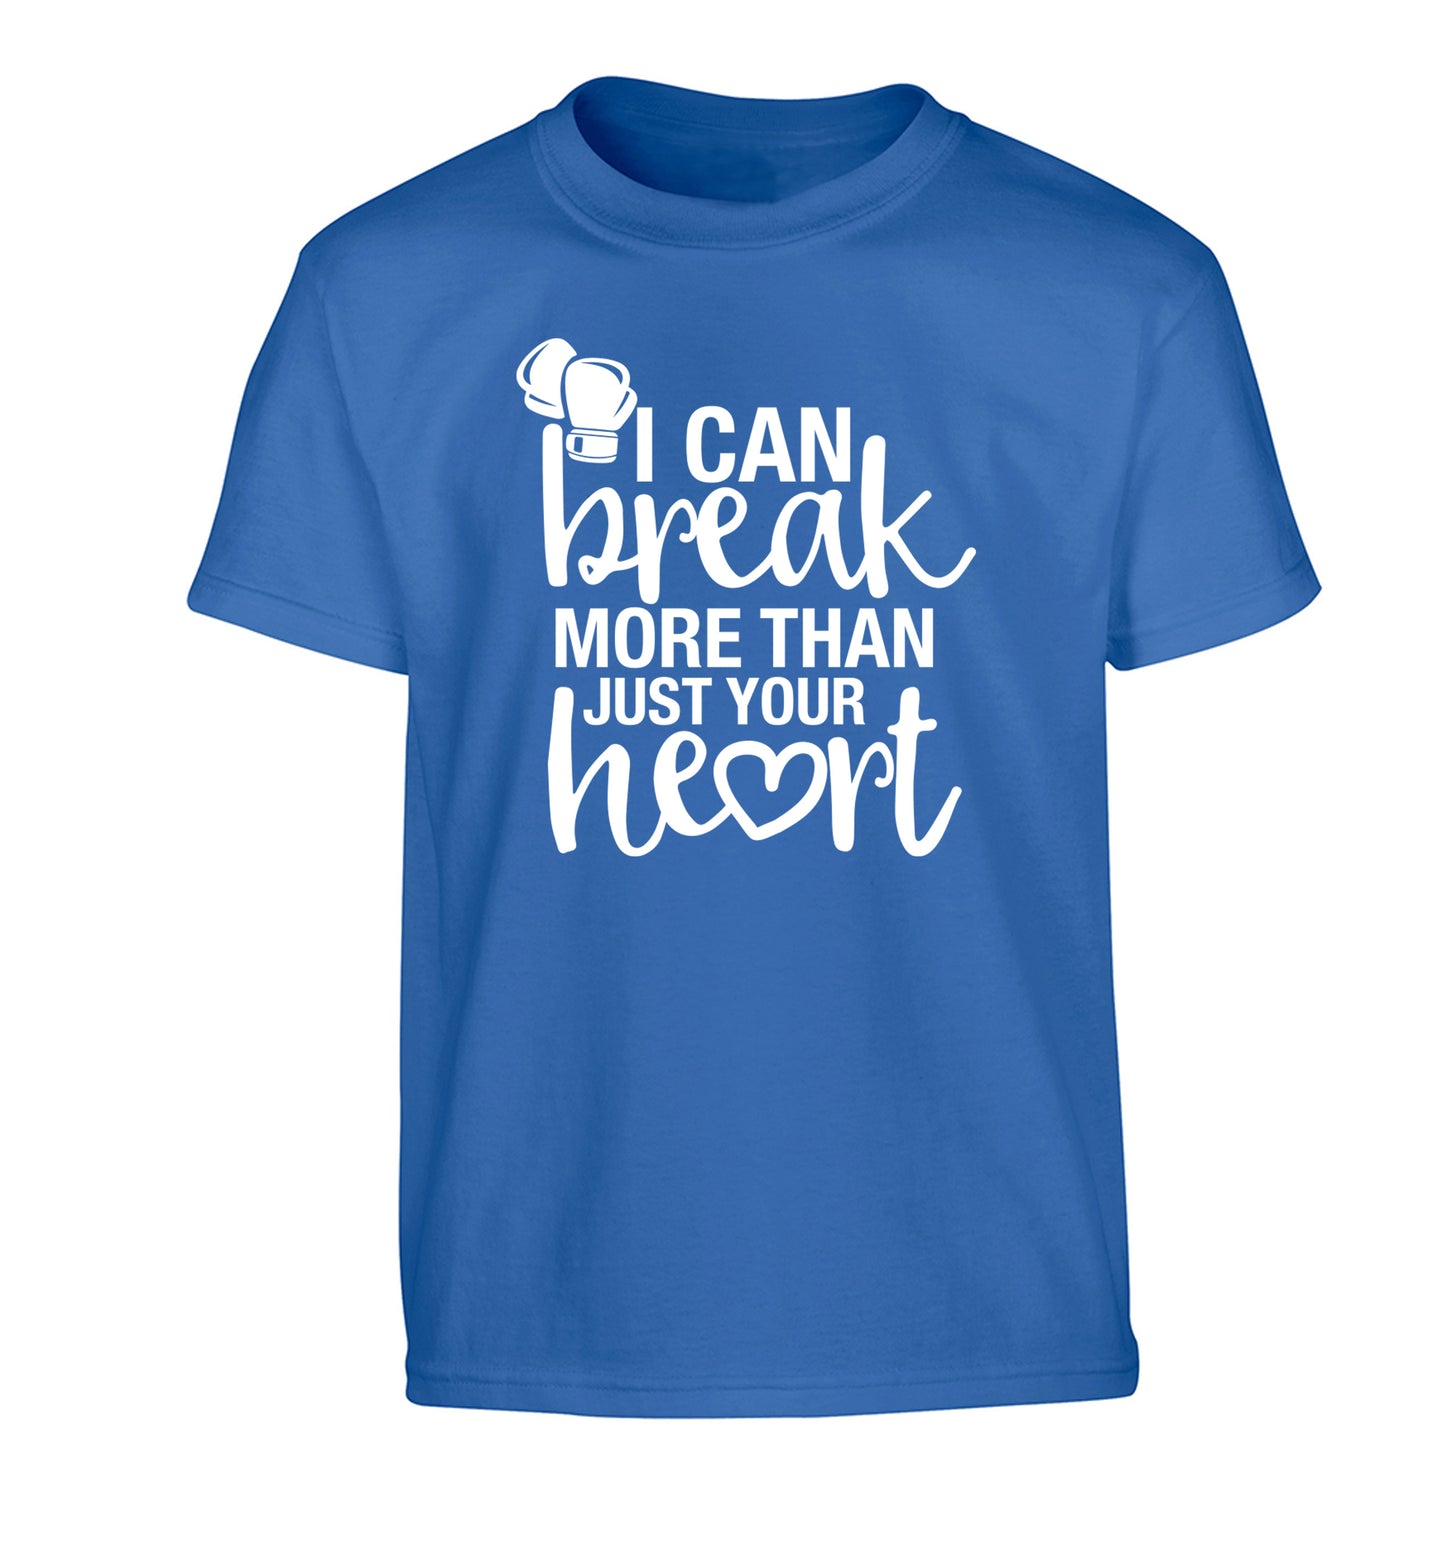 I can break more than just your heart Children's blue Tshirt 12-13 Years